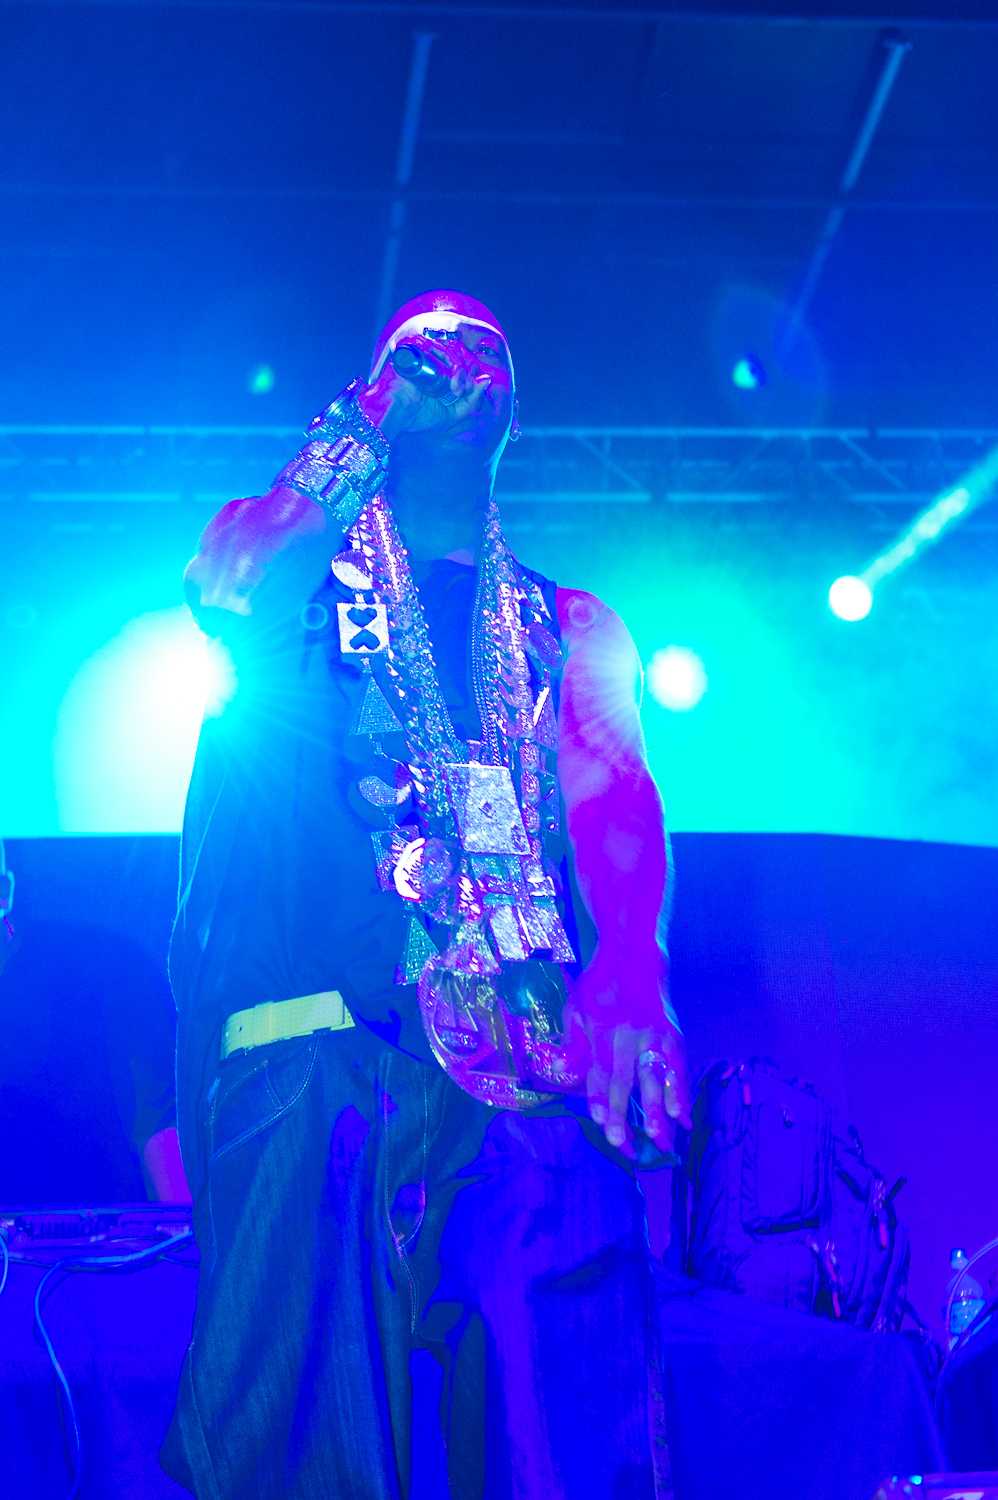 Slick Rick raps to “Childrens Story”, after his wife brought out his “old school” necklaces. Max Jackson | Photo Editor